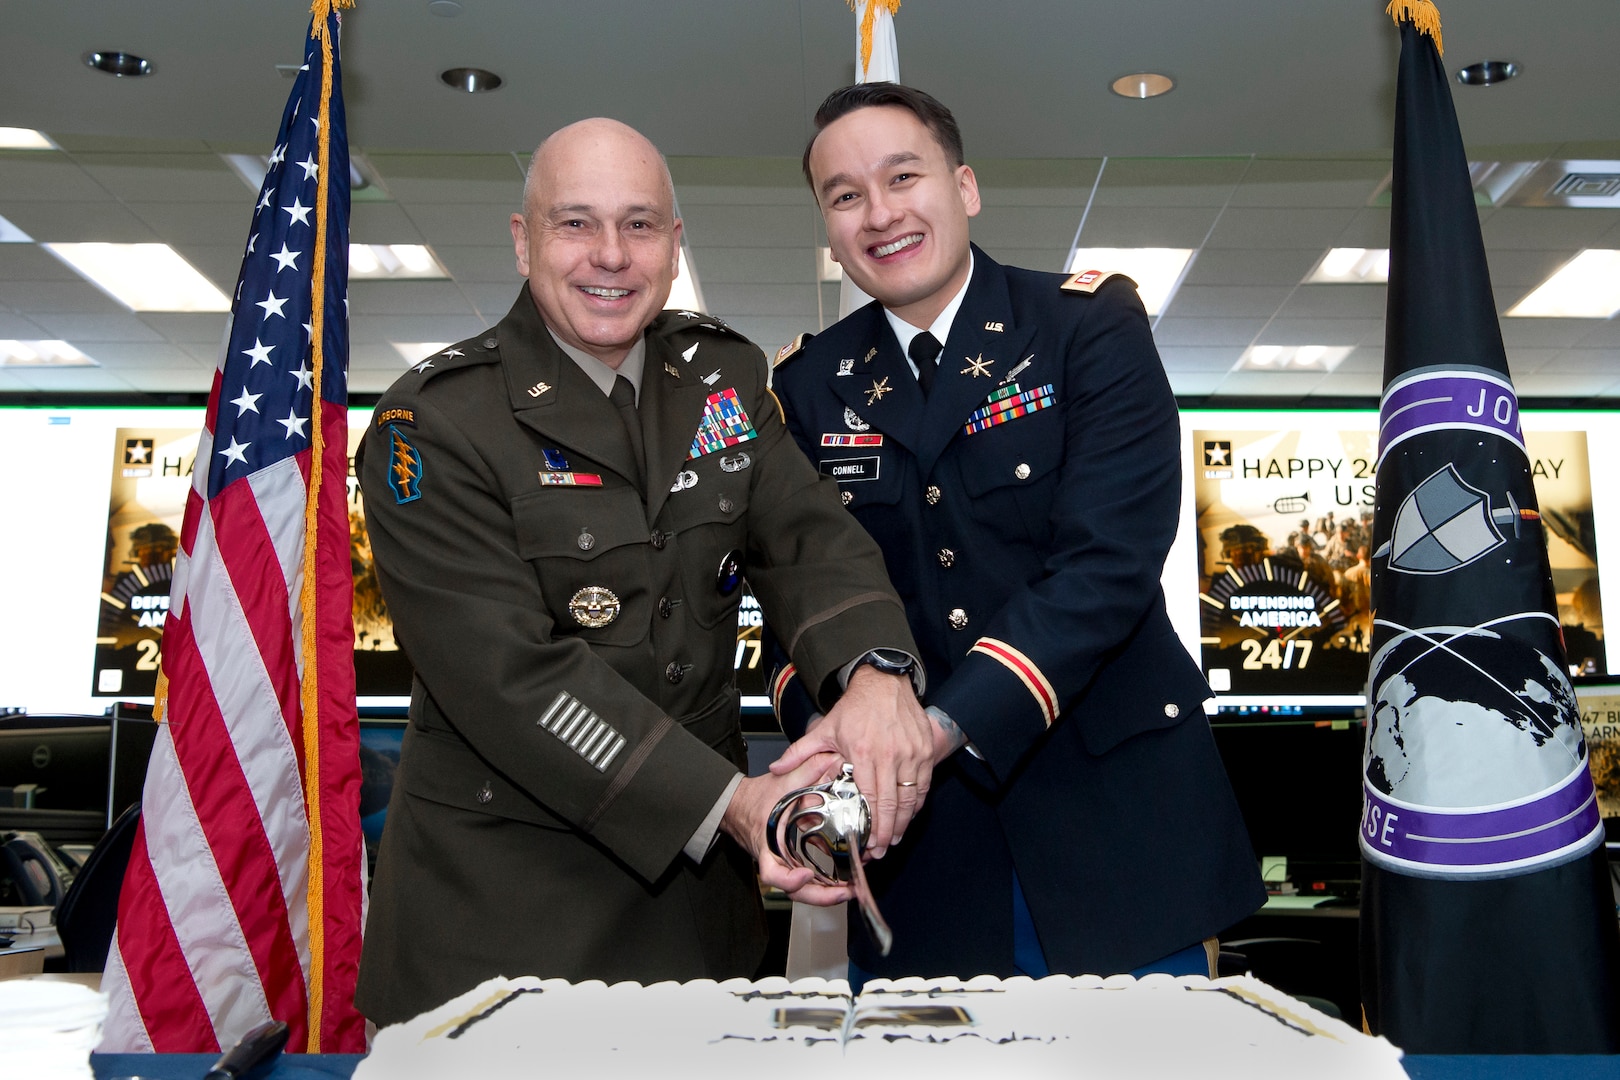 Two men in military uniforms cutting a cake